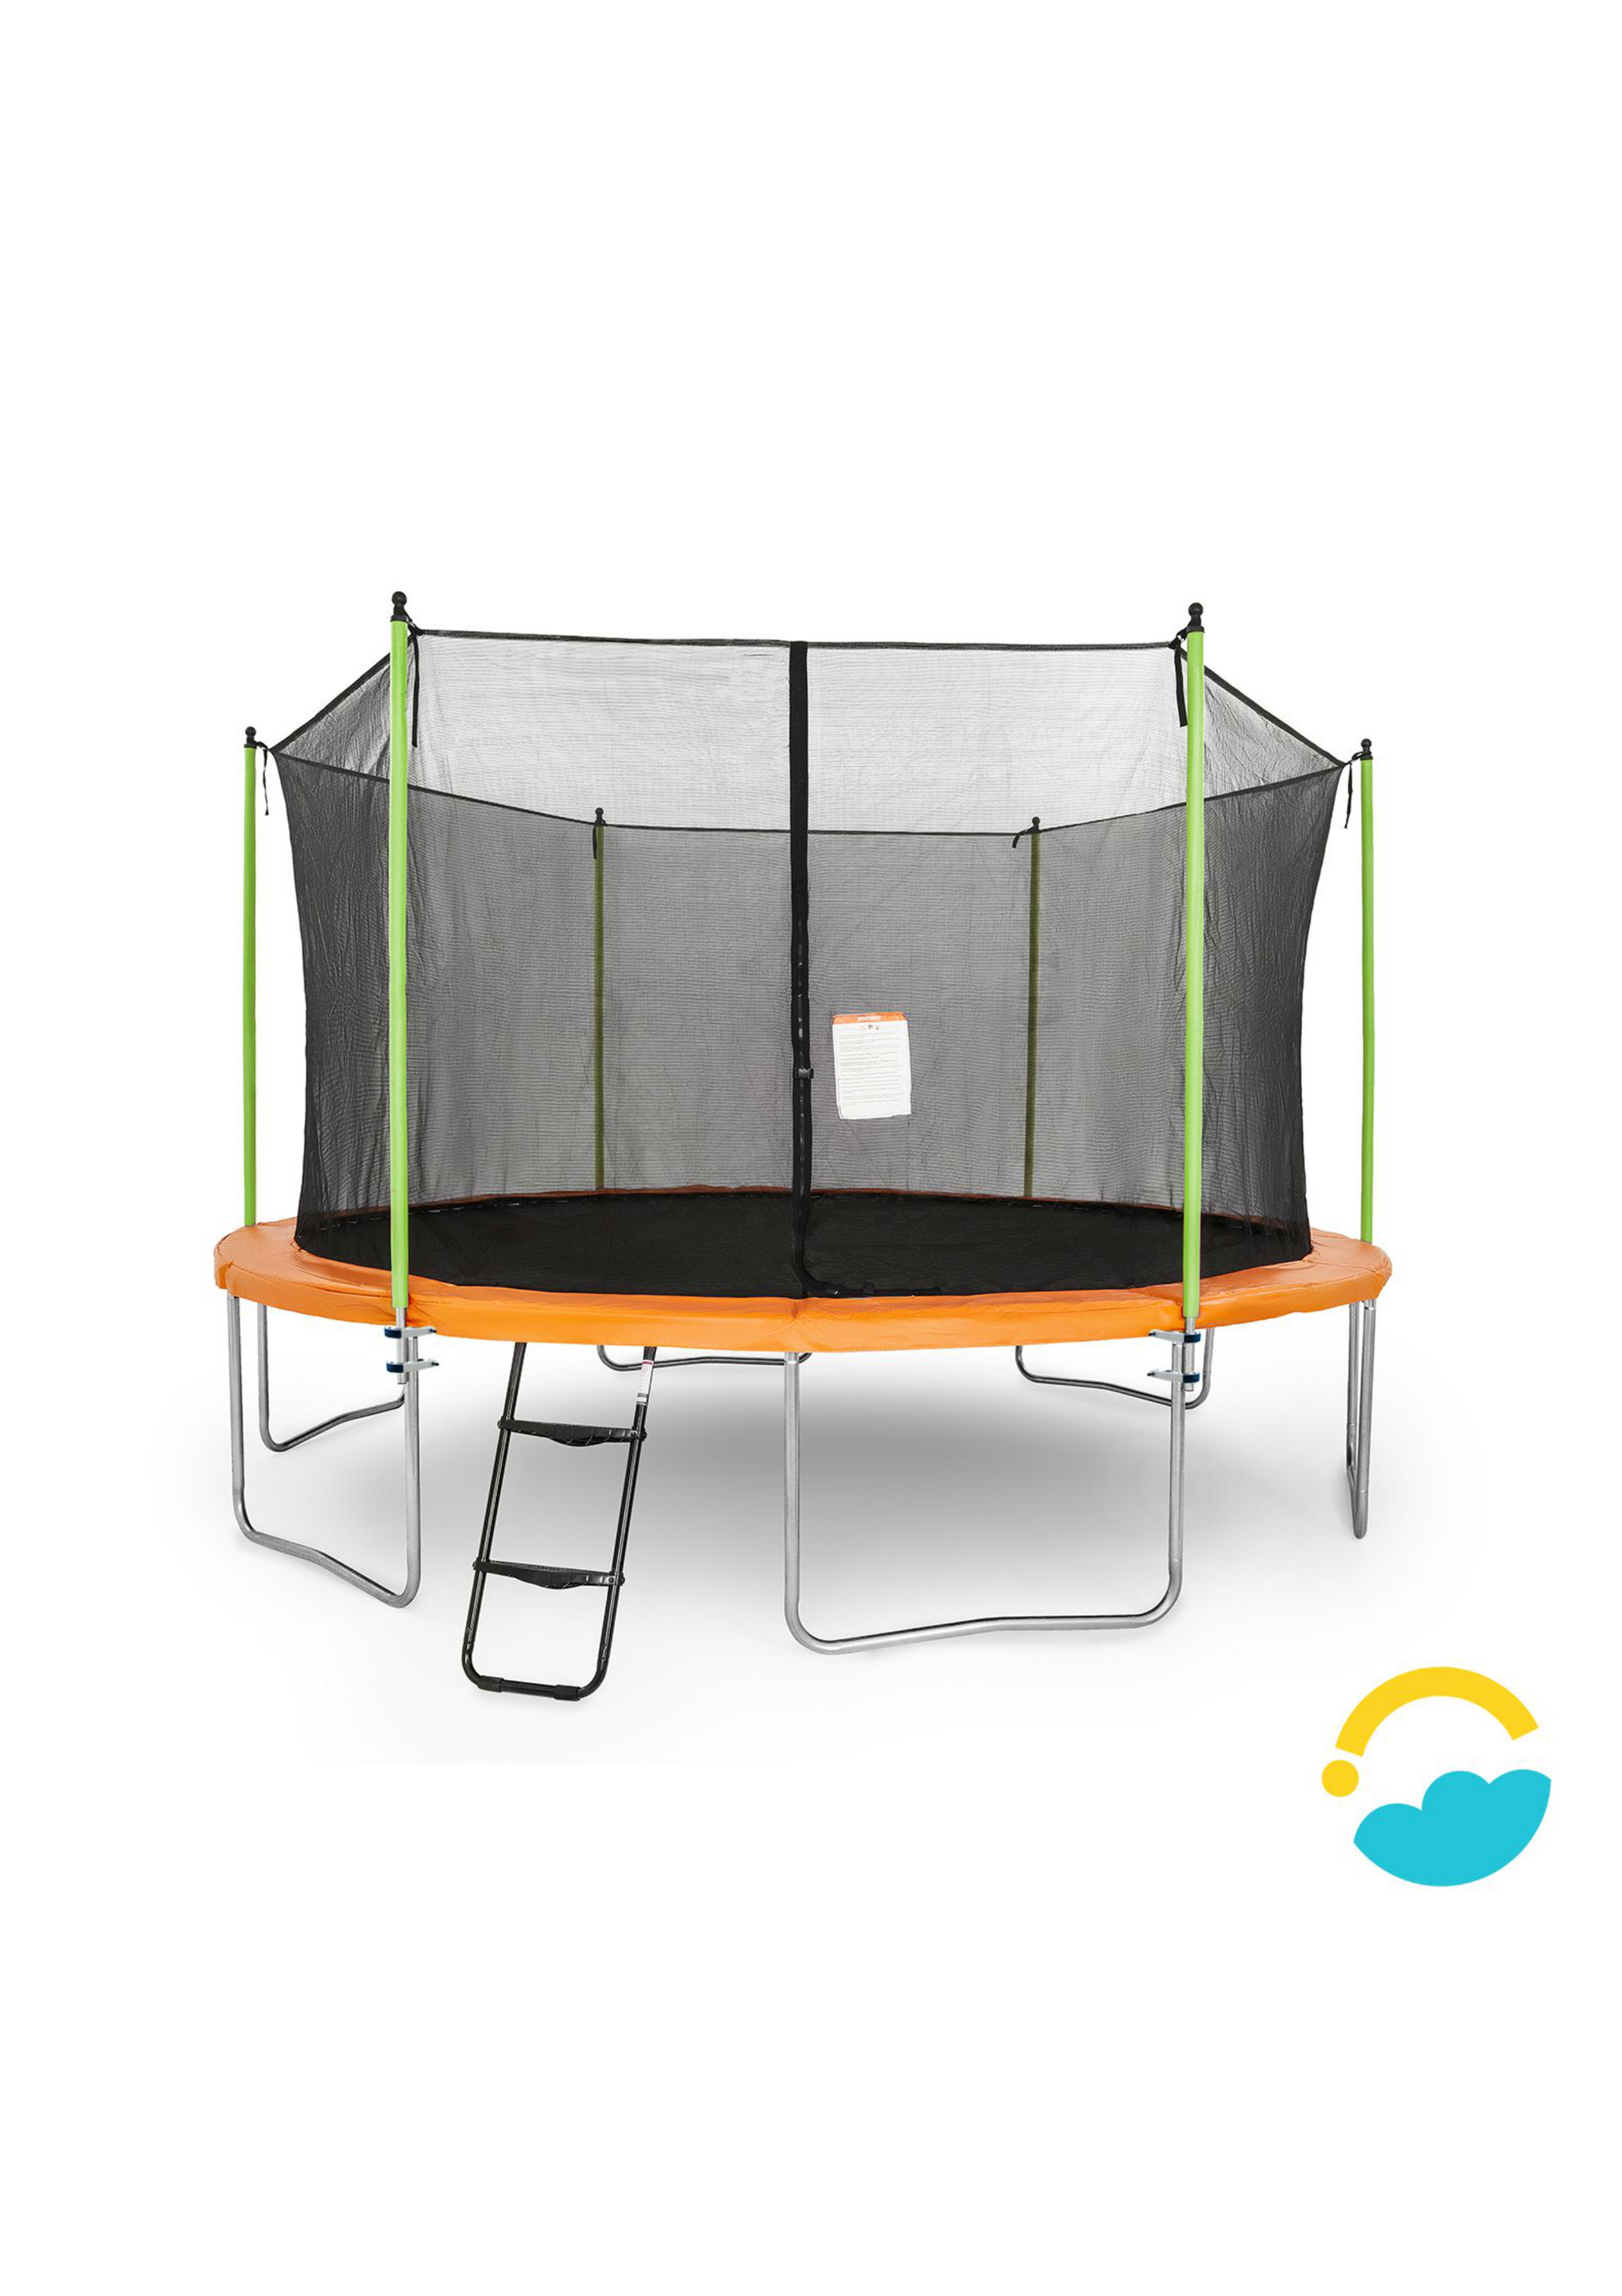 Image of Enclosure Poles attached to the Trampoline.  